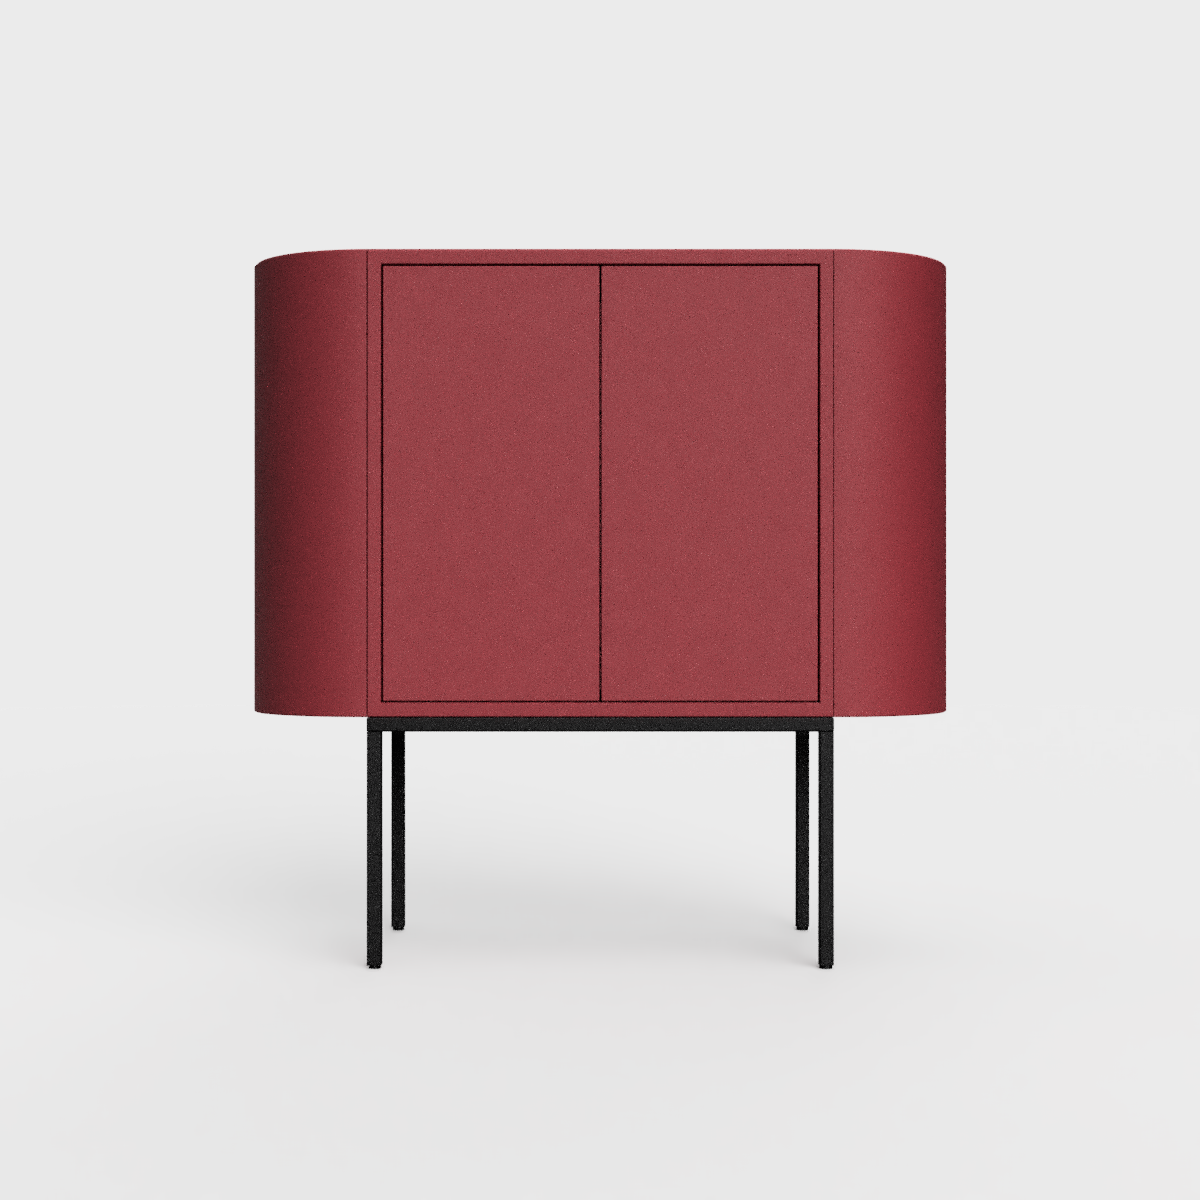 Siena 01 Sideboard in Ruby color, powder-coated steel, elegant and modern piece of furniture for your living room